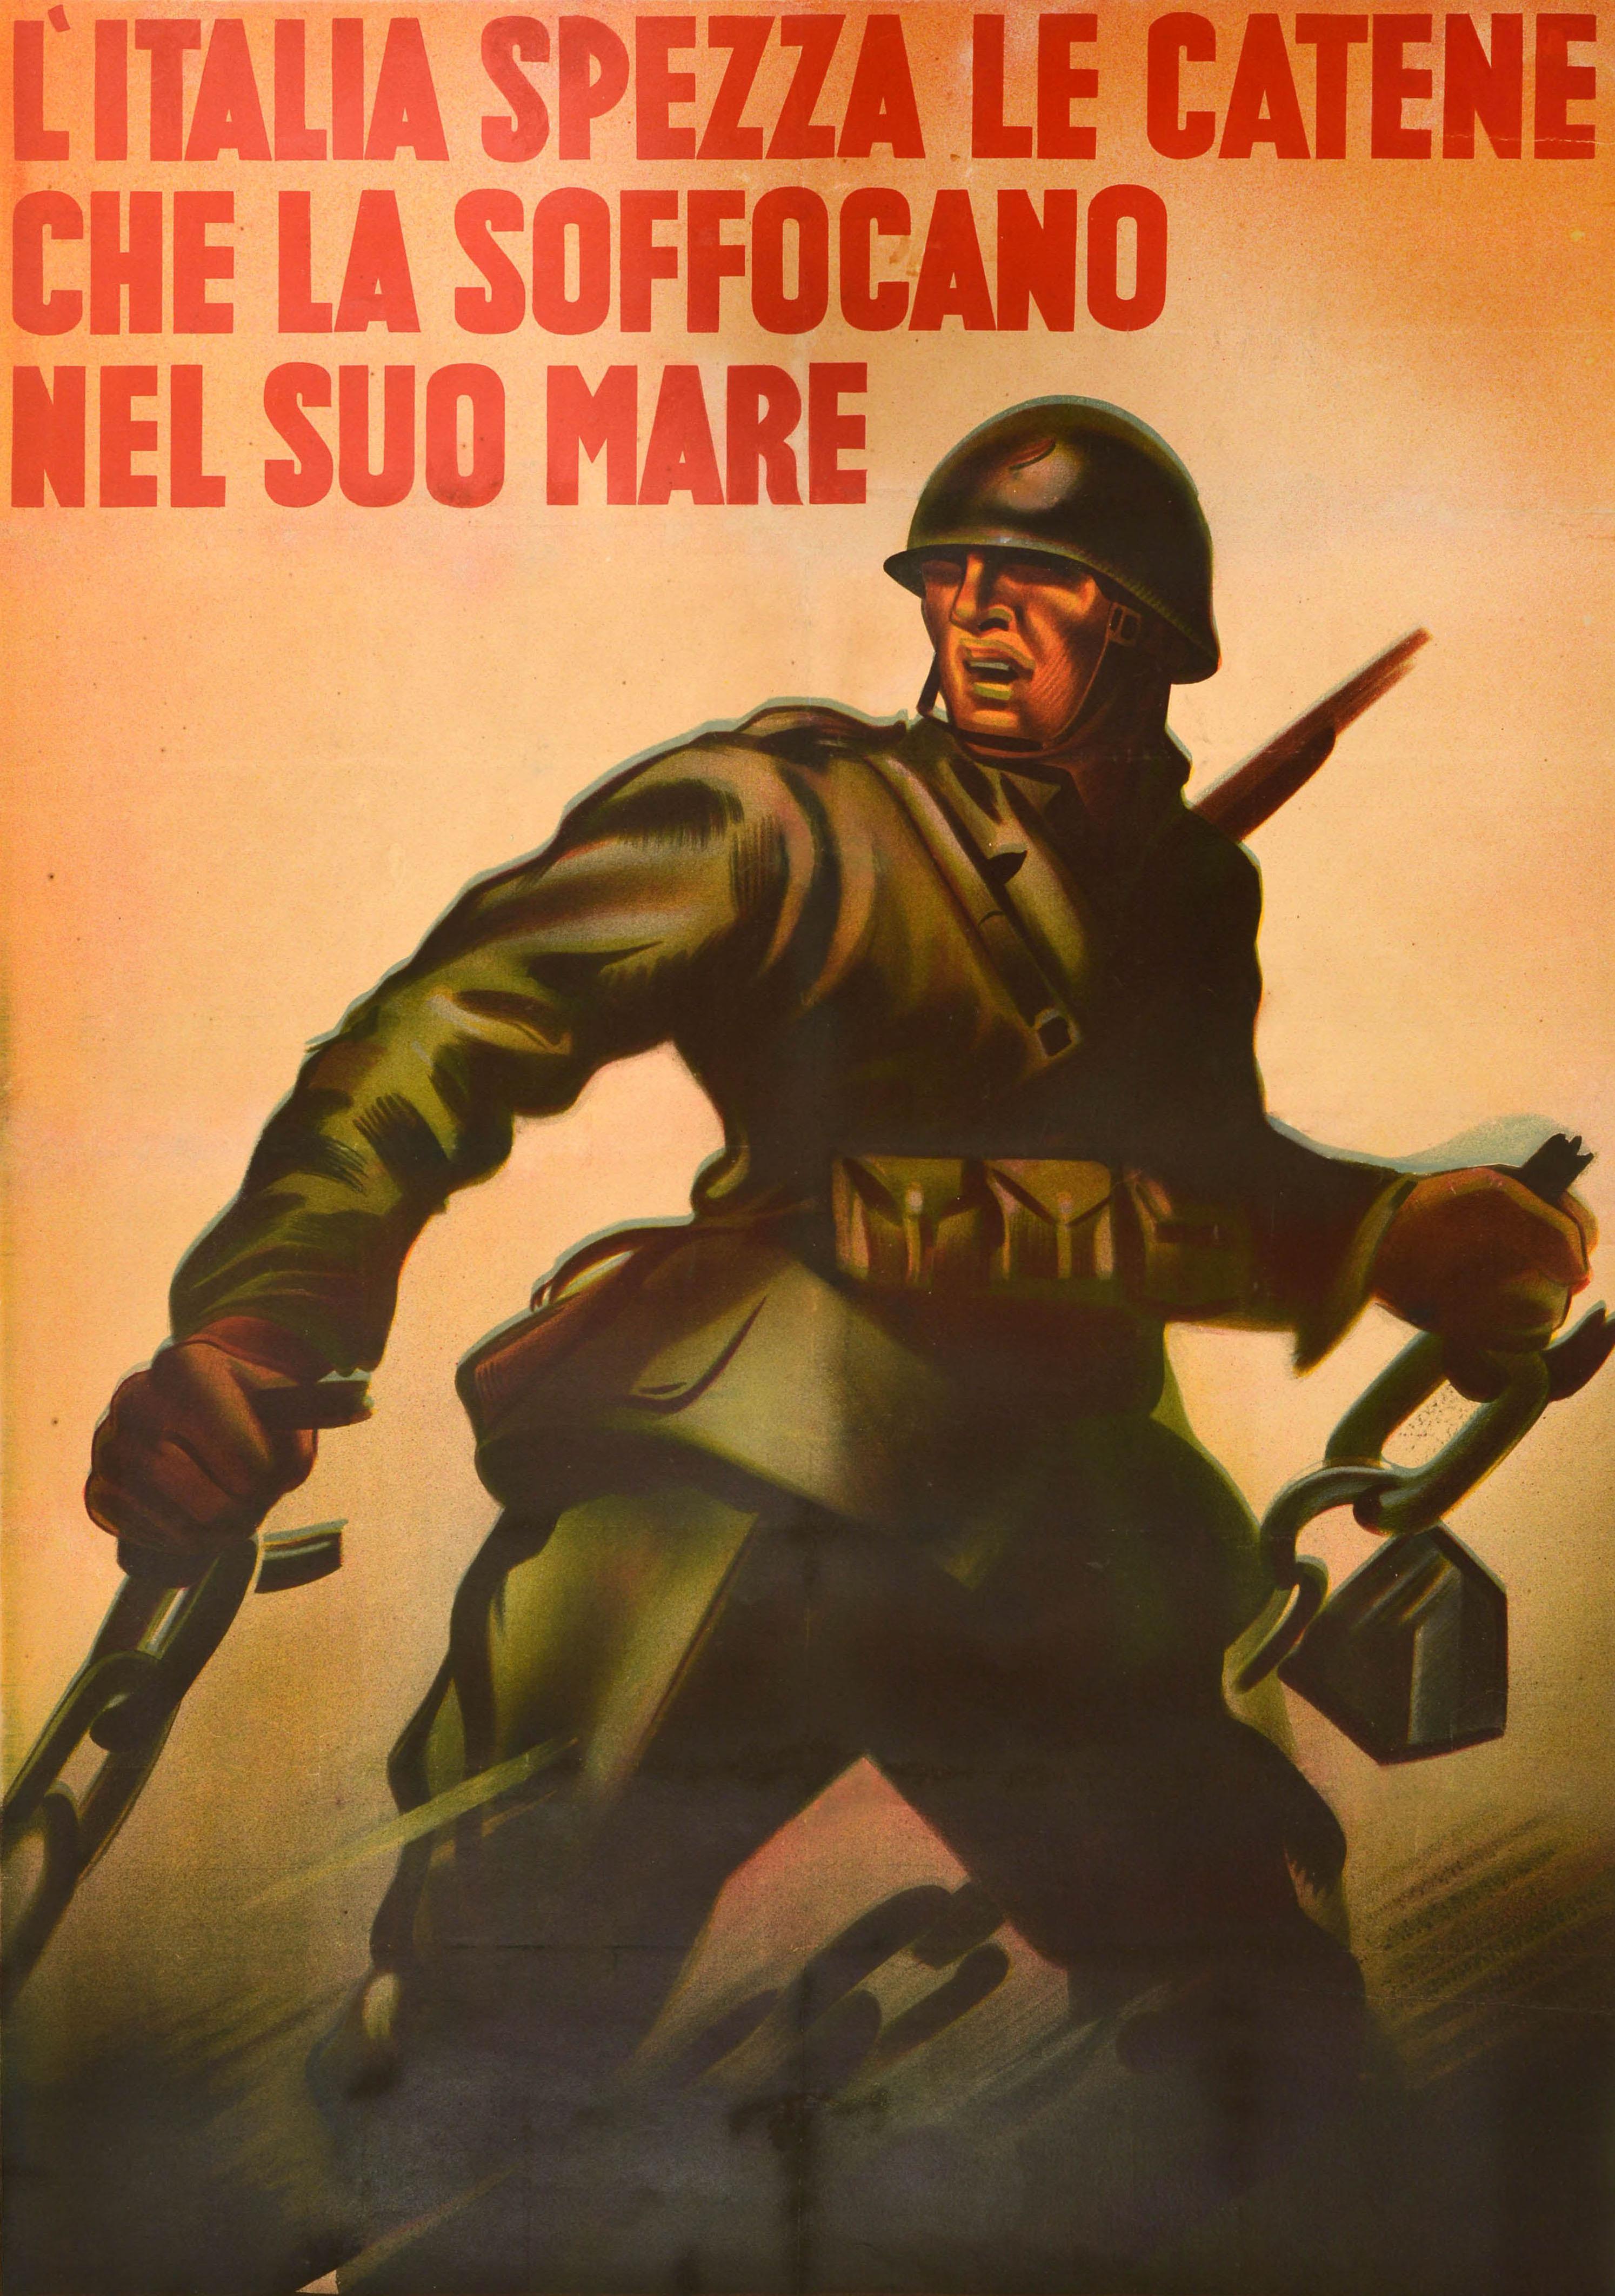 Original vintage Italian World War Two poster featuring a dynamic image of a soldier in uniform breaking a chain with the caption in red reading - l'Italia spezza le catene che la soffocano nel suo mare / Italy breaks the chains that suffocate her